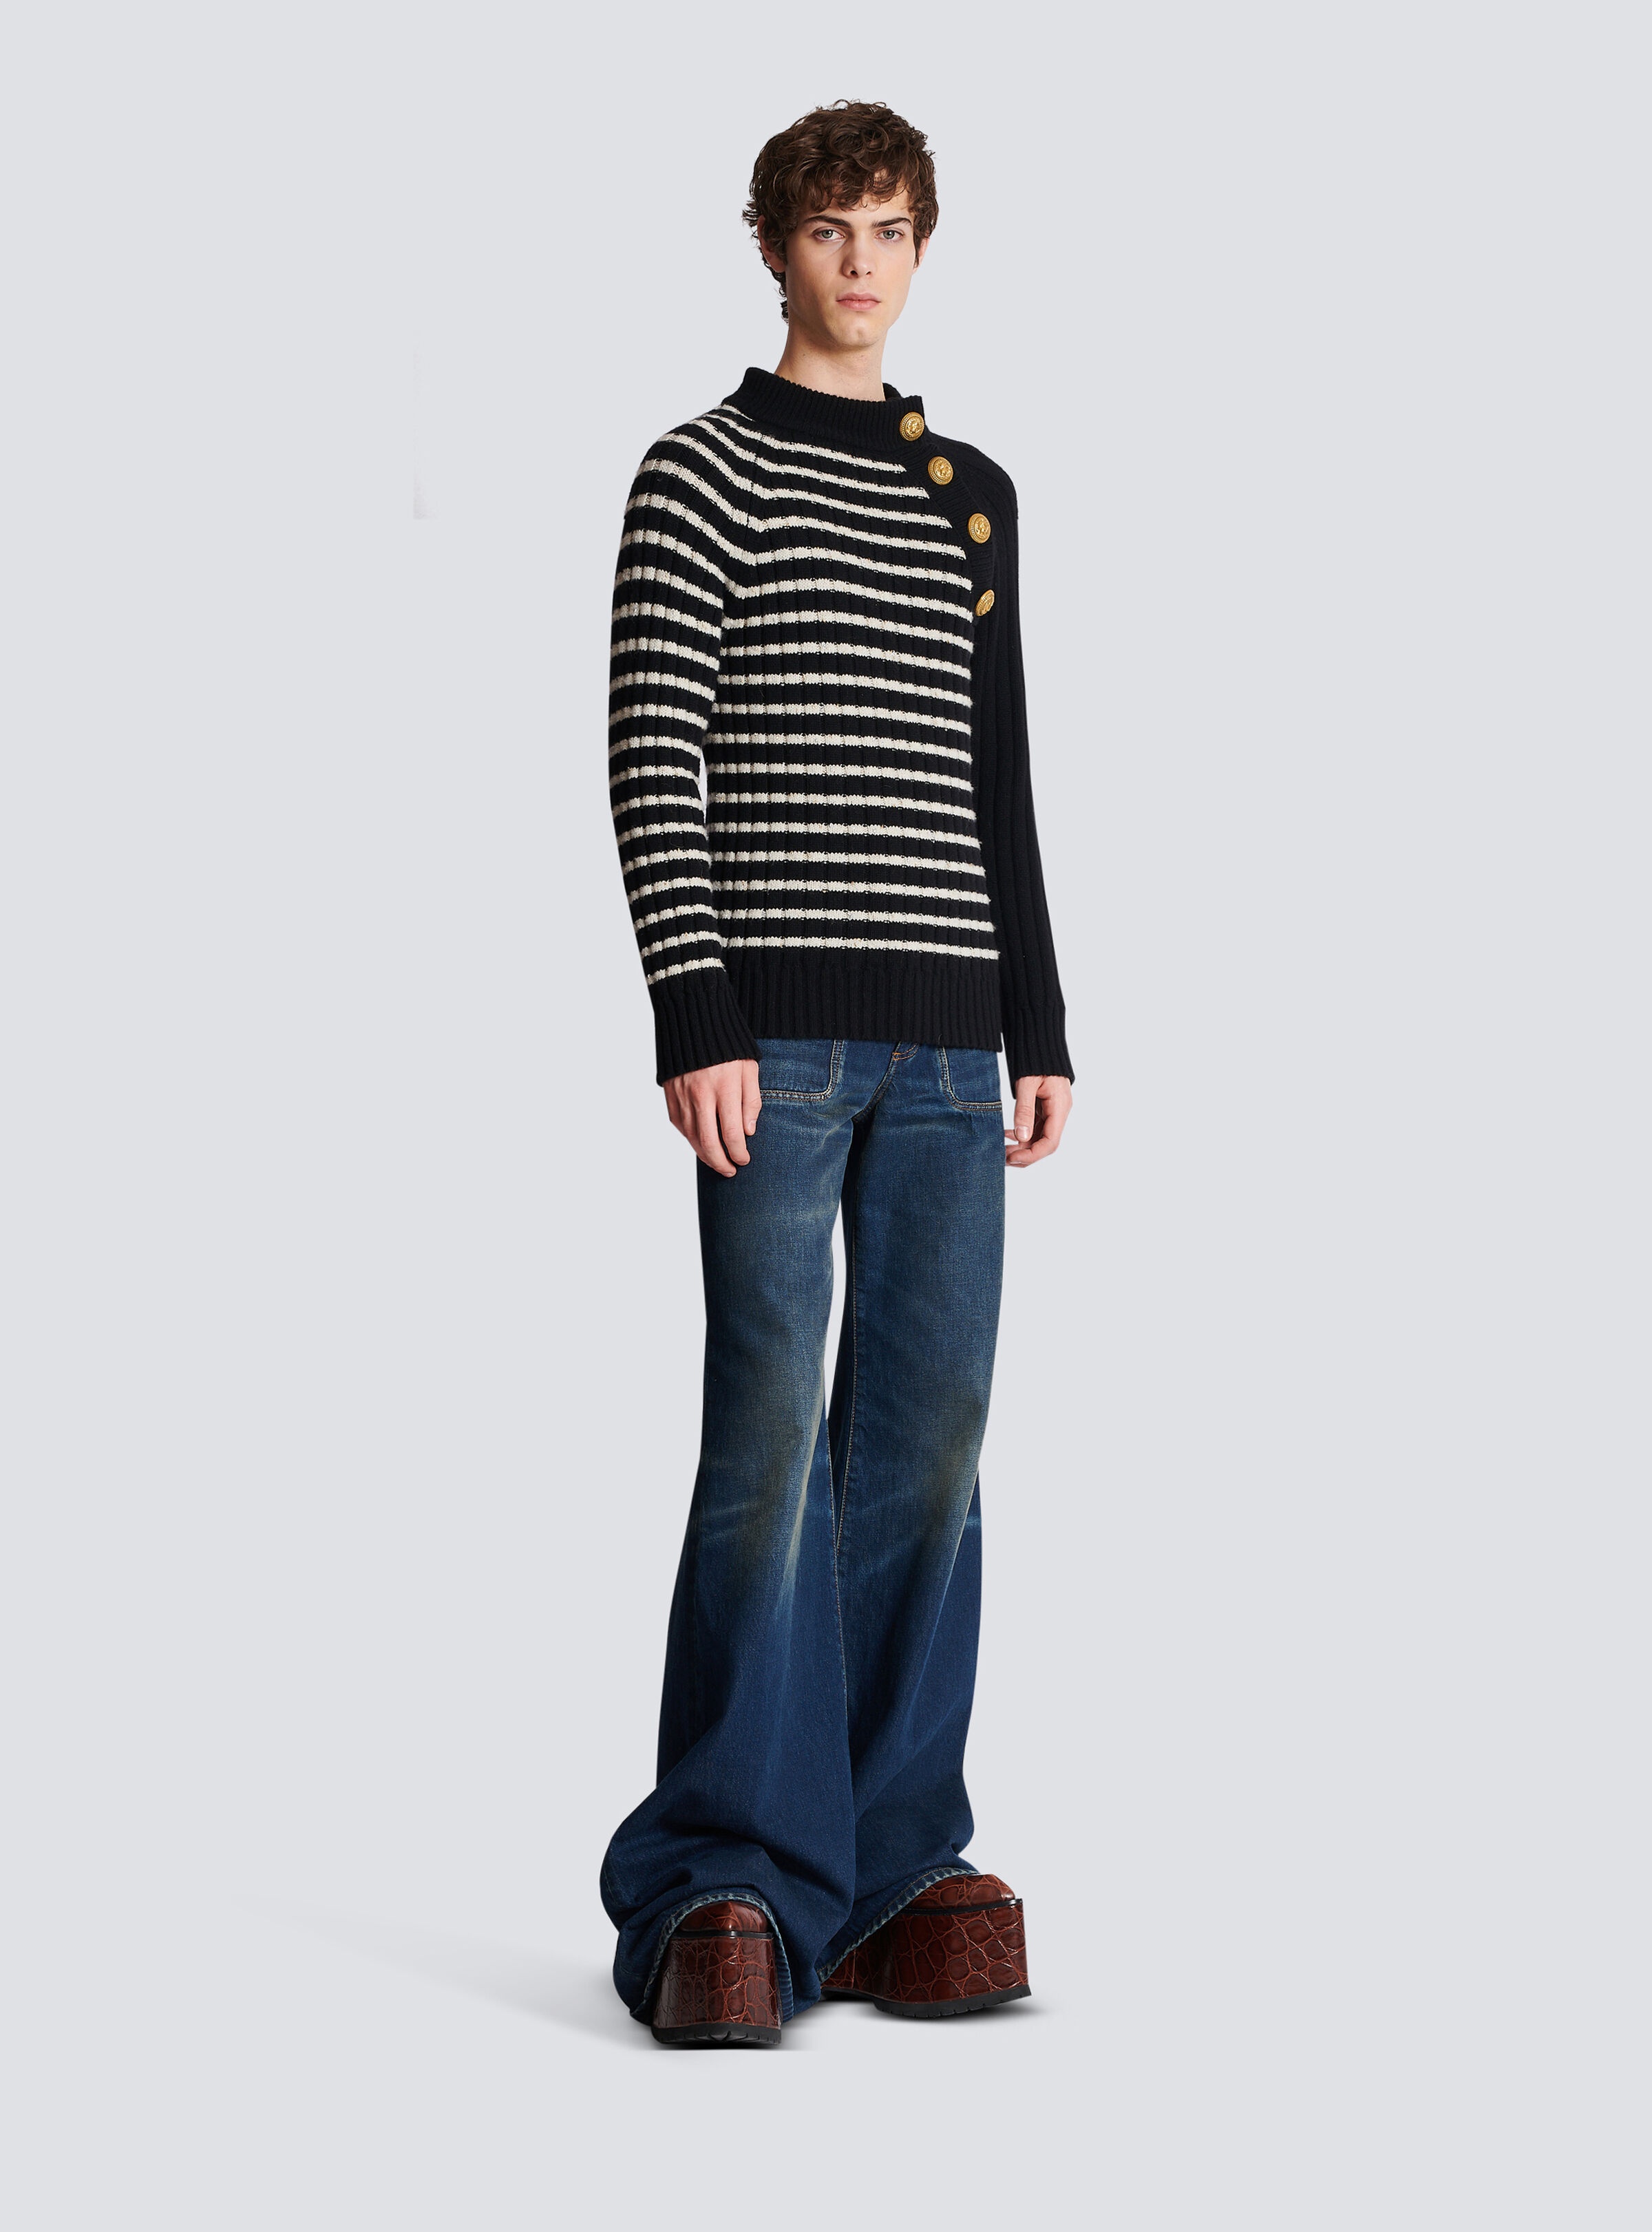 Striped jumper with golden buttons - 3